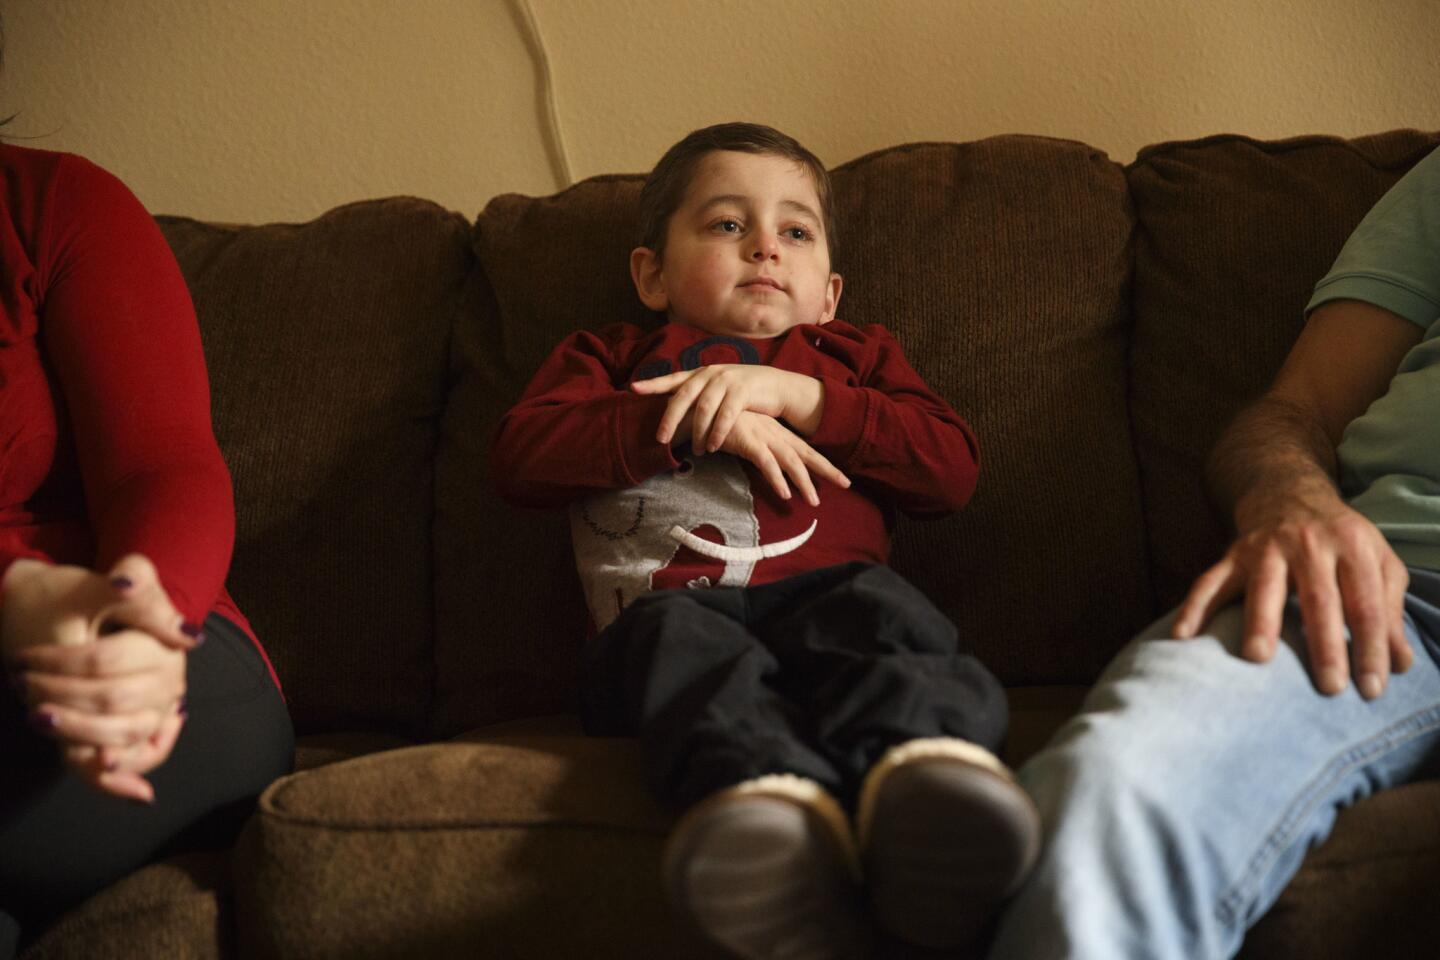 Tony Alsabaa, 5, a Syrian American boy sent to L.A. for treatment for a rare disease, sits with his aunt Fadaa Assaf and uncle Amil Rebz at their home in Santa Clarita.